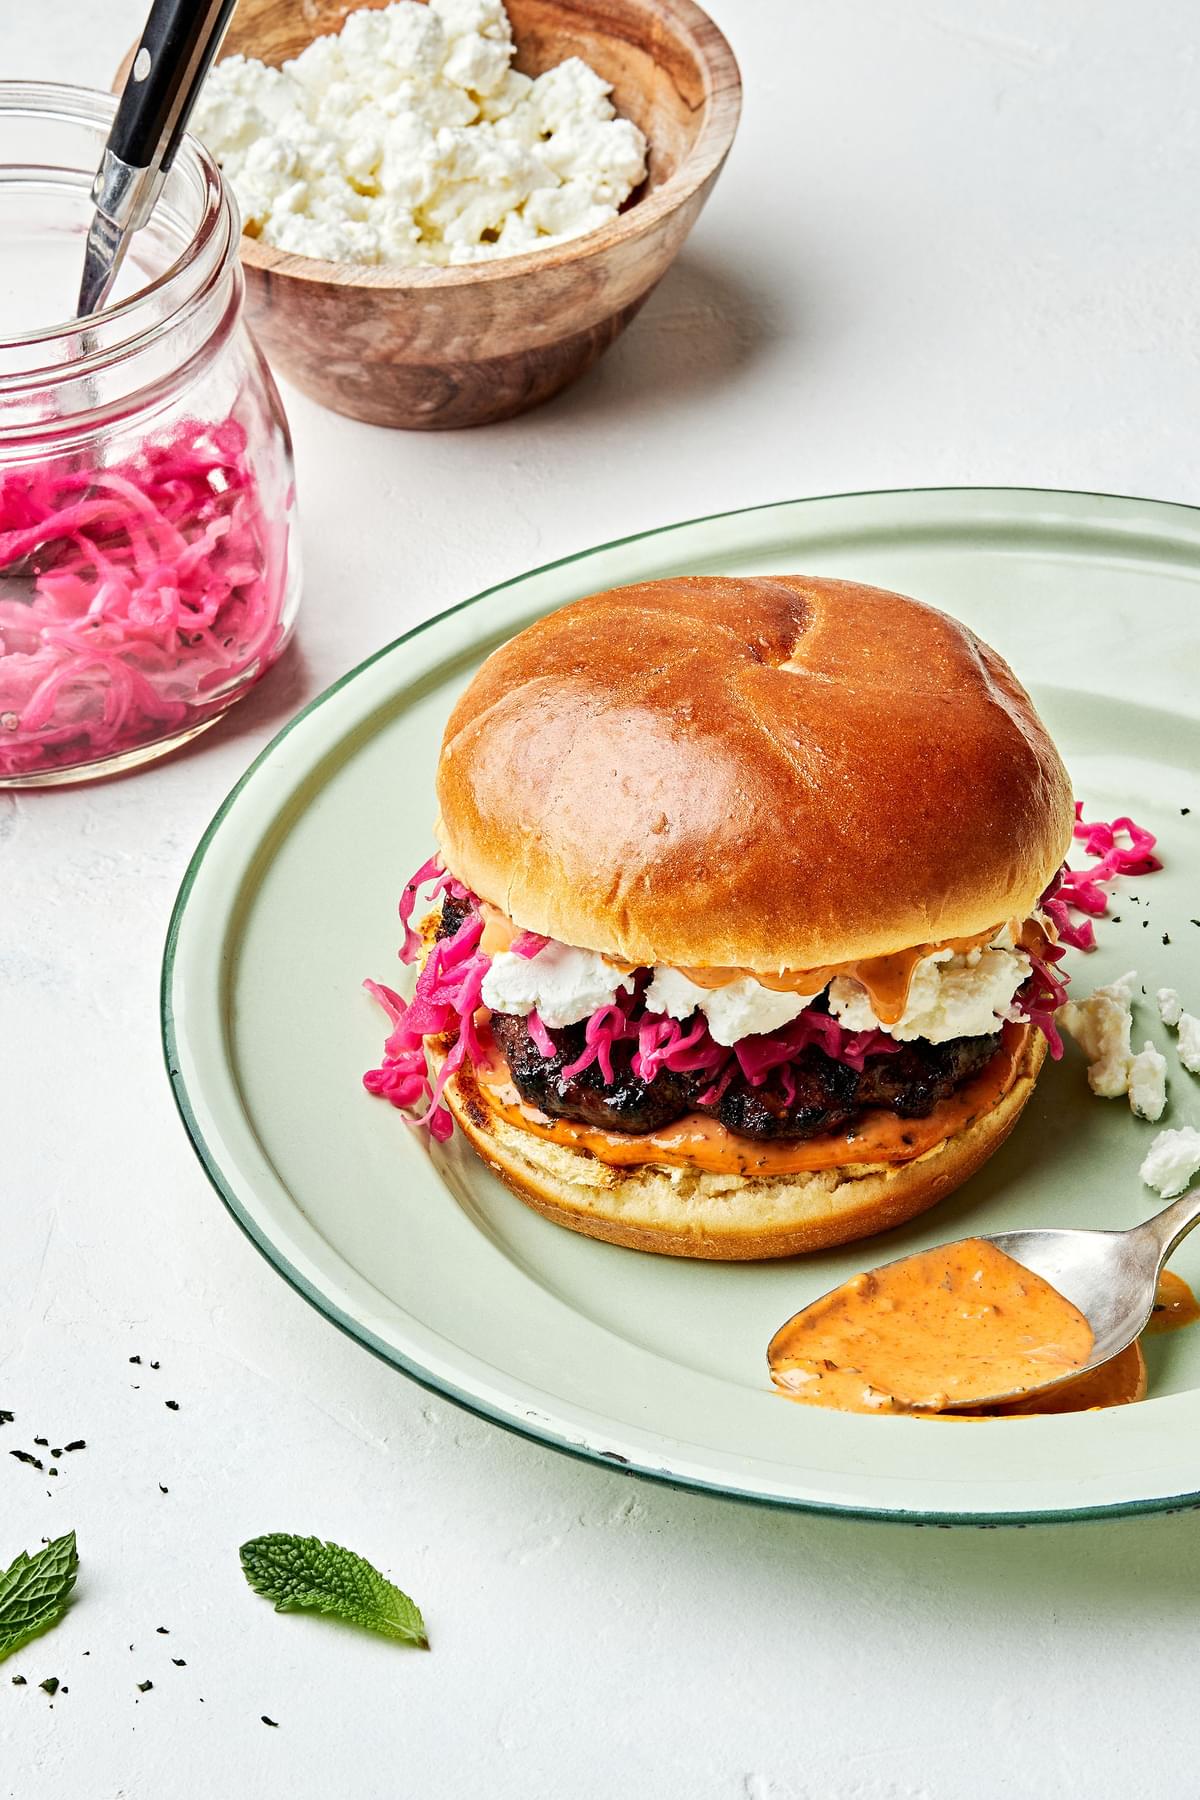 A Lamb Burger With Harissa Mayo and  Pickled Red Cabbage with chevre next to bowls of chèvre cheese and pickled red cabbage